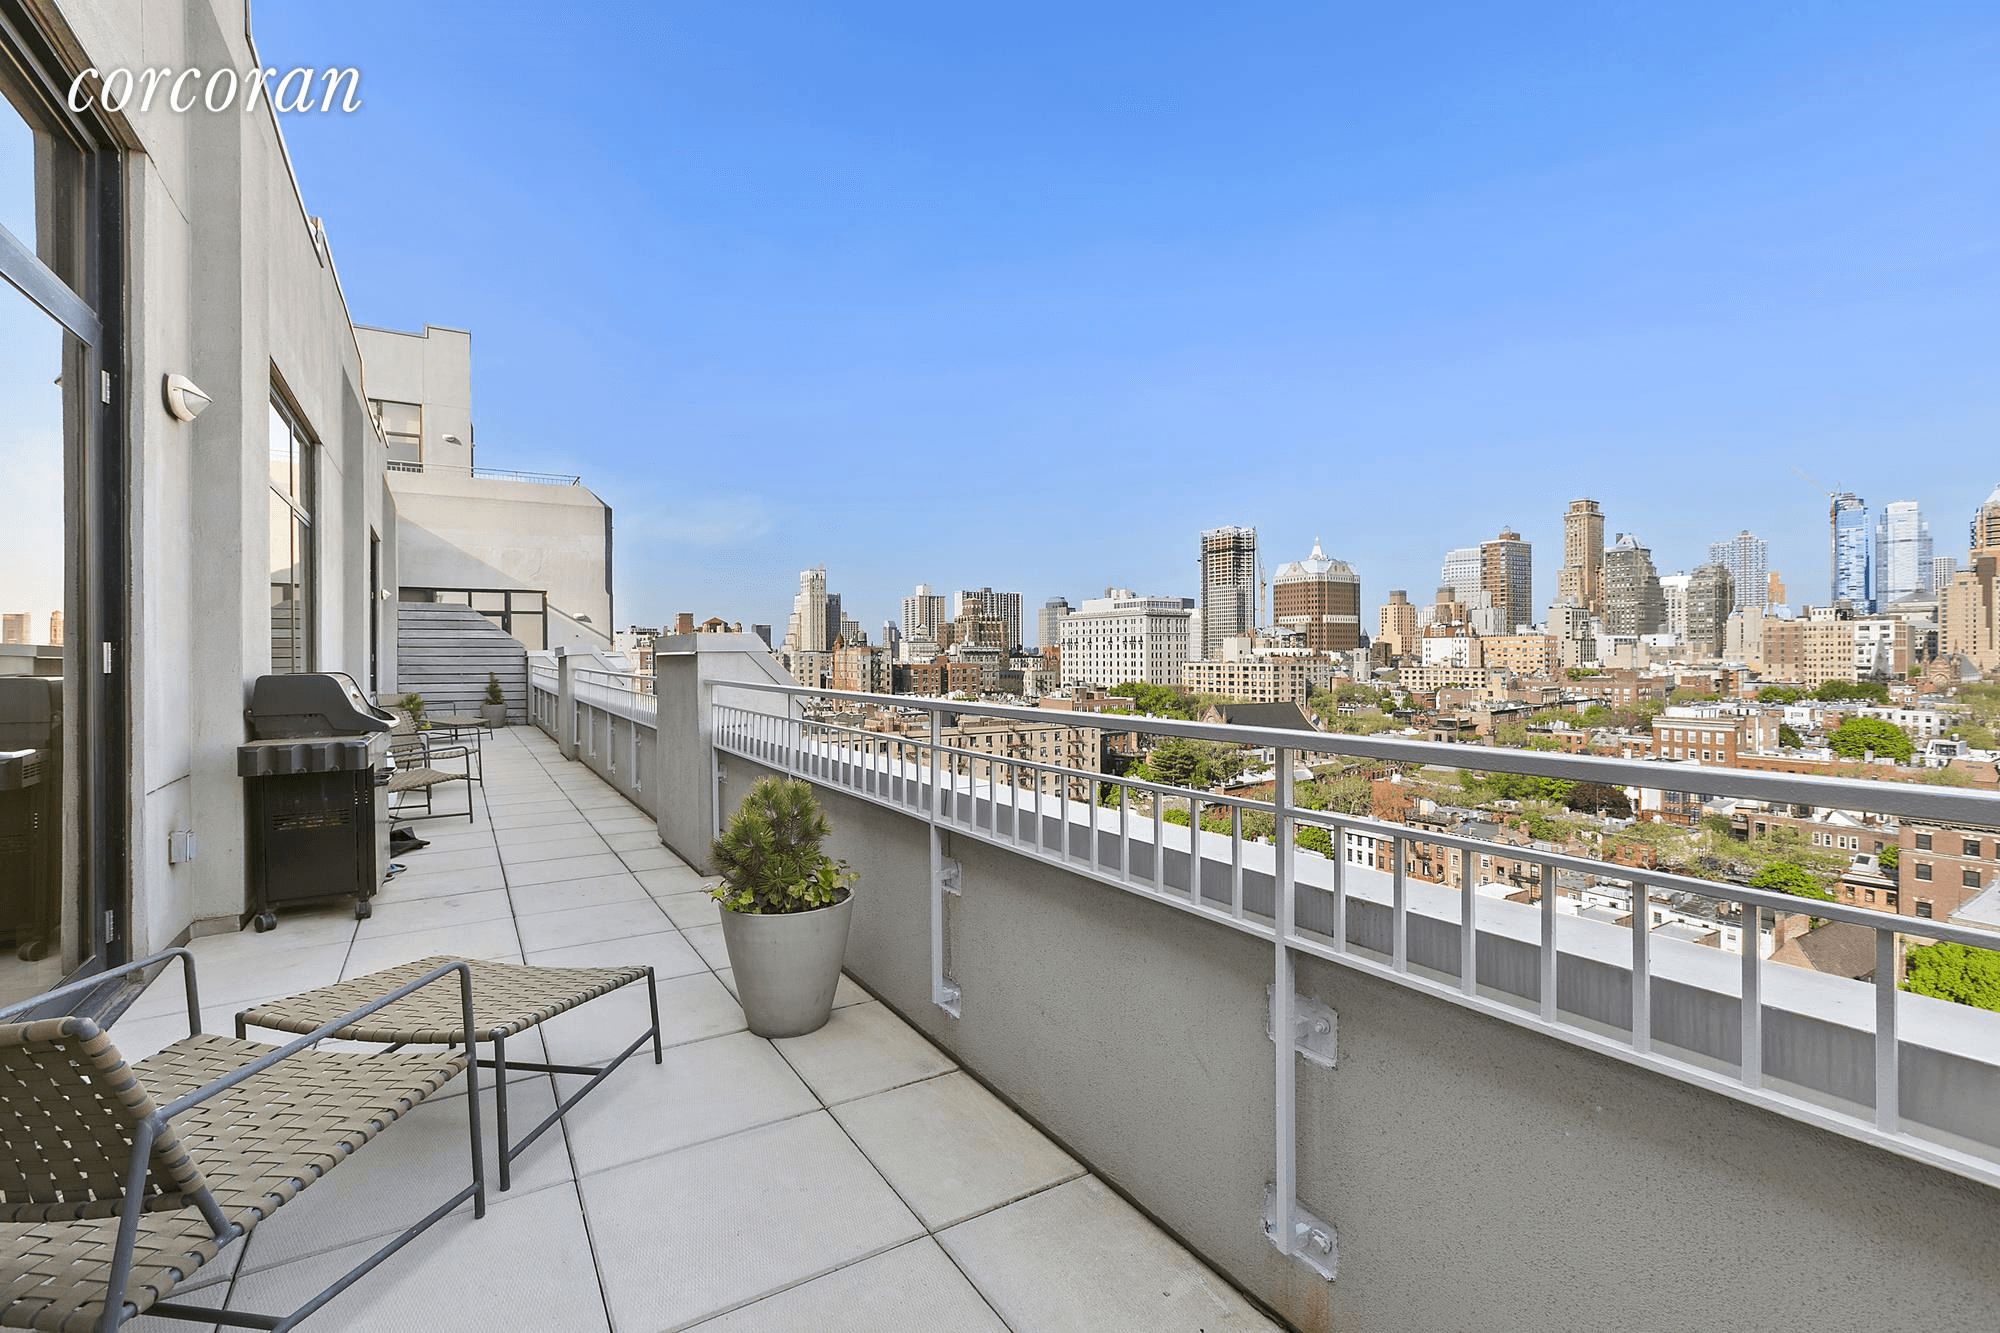 Stunning Penthouse with 548 sf terrace, enjoying unobstructed eastern views This stunning 2 Bedroom 2 bath 1450 s f 548 s f private terrace, converted warehouse PENTHOUSE condo has it ...